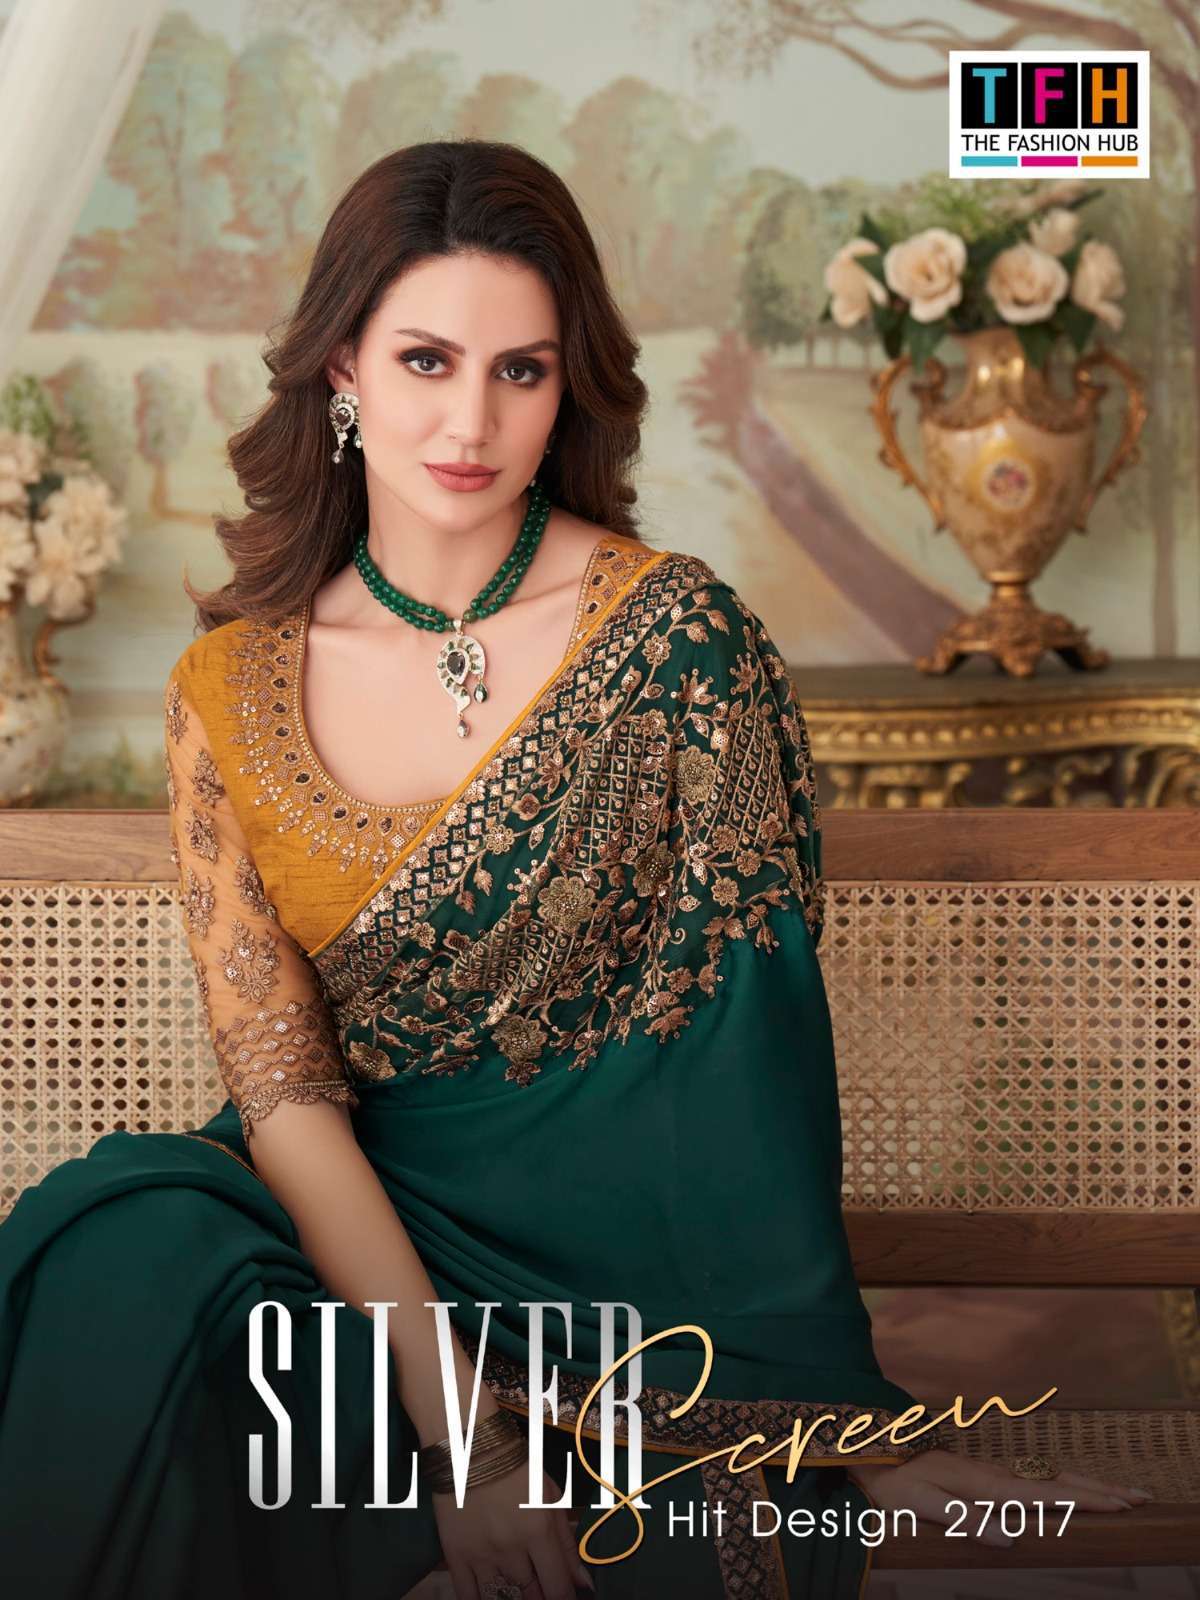 TFH PRESENTS SILVER SCREEN HIT DESIGN 27017 NEW DESIGNER PARTYWEAR FANCY SAREES CATALOG WHOLEALER AND EXPORTER IN SURAT